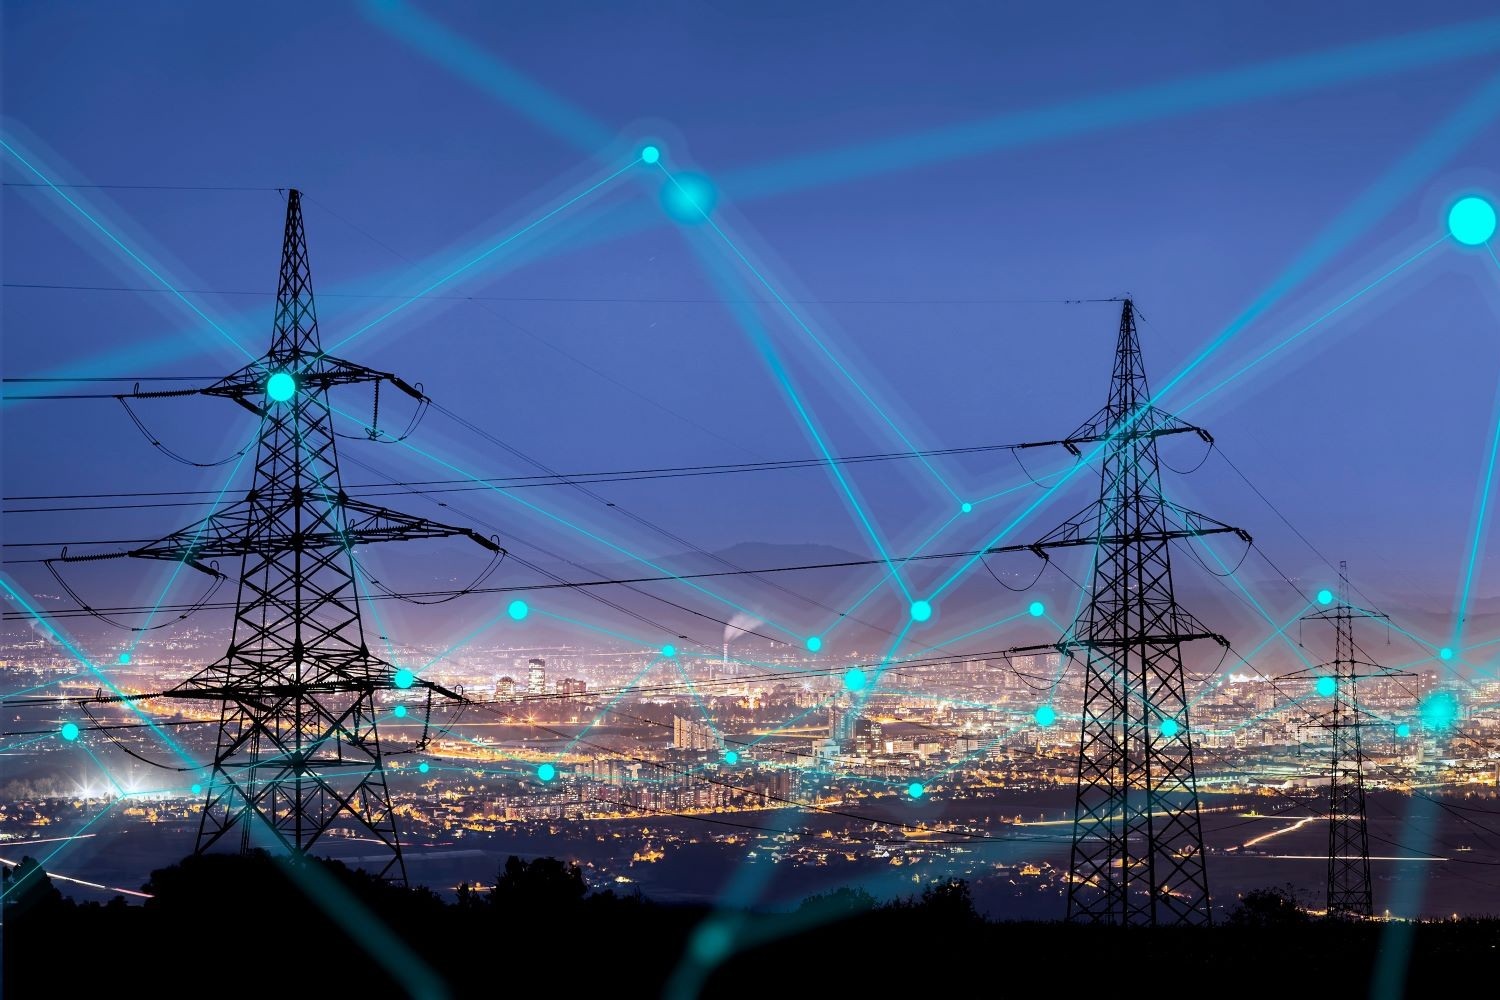 Electricity pylons against a city backdrop at dusk, with a network of connected points suggesting the future interconnected digital twin applications for the UK energy system.